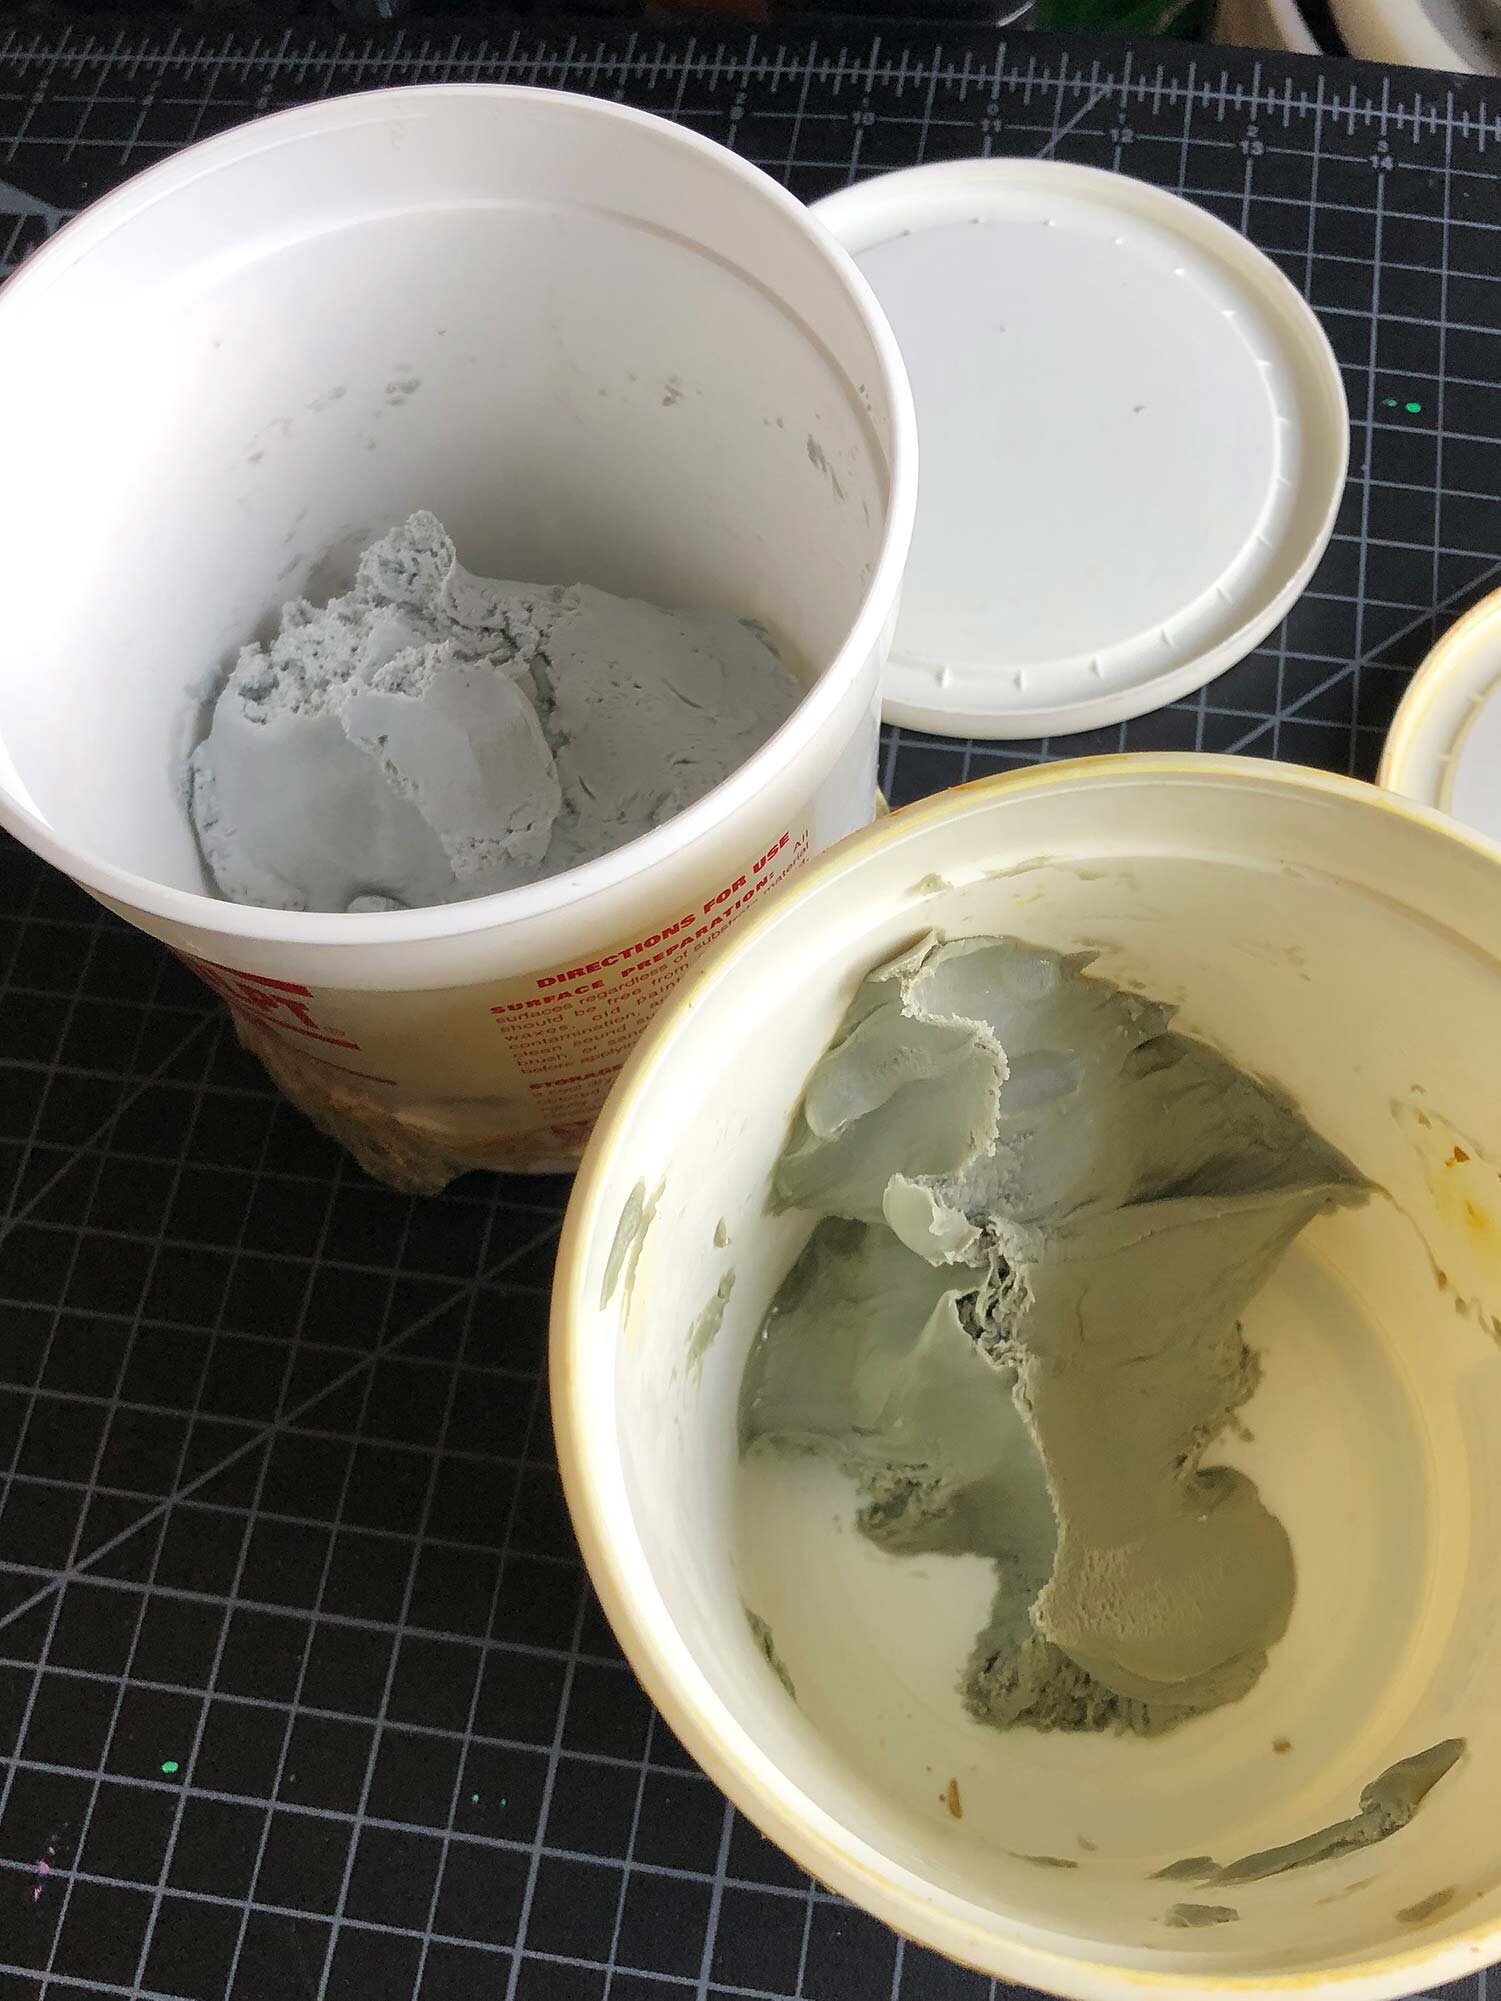 The resin and hardener in the tubs